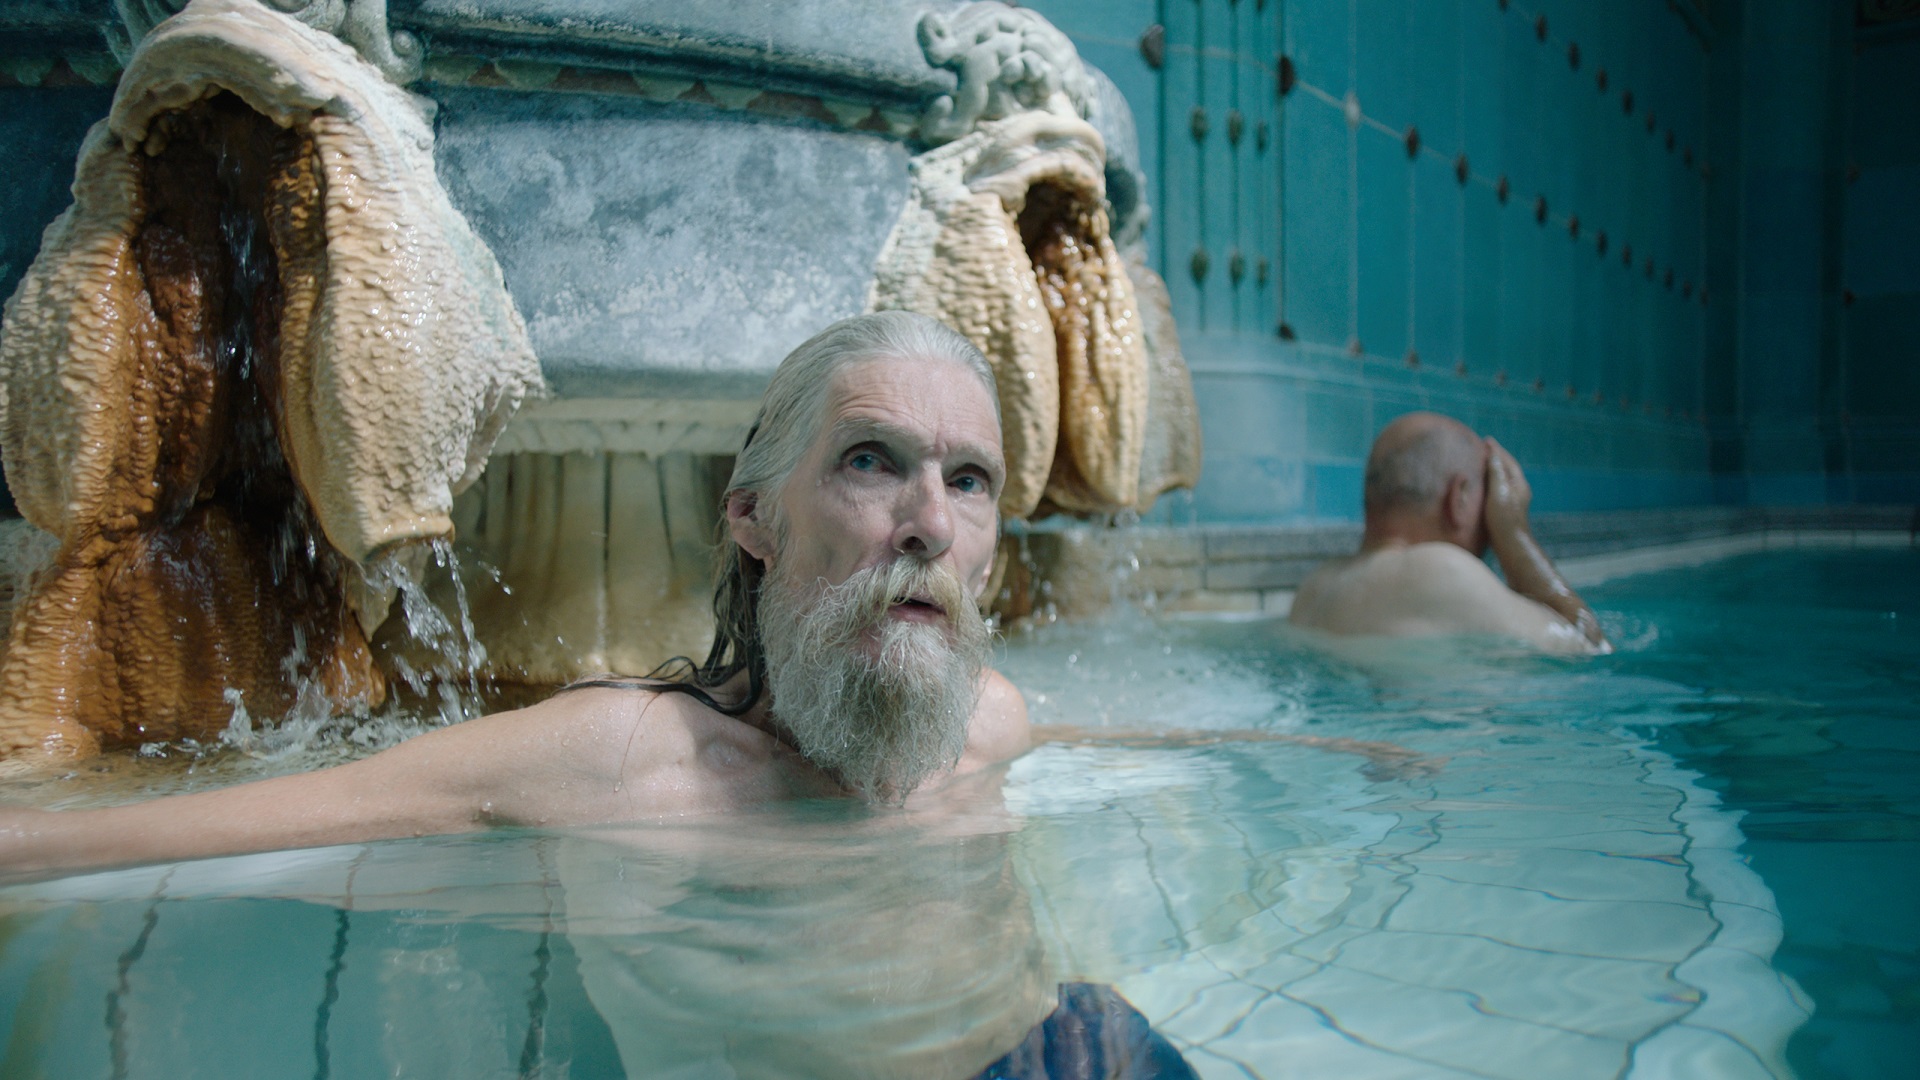 Björn Andrésen in baths in doc 'The Most Beautiful Boy in the World"